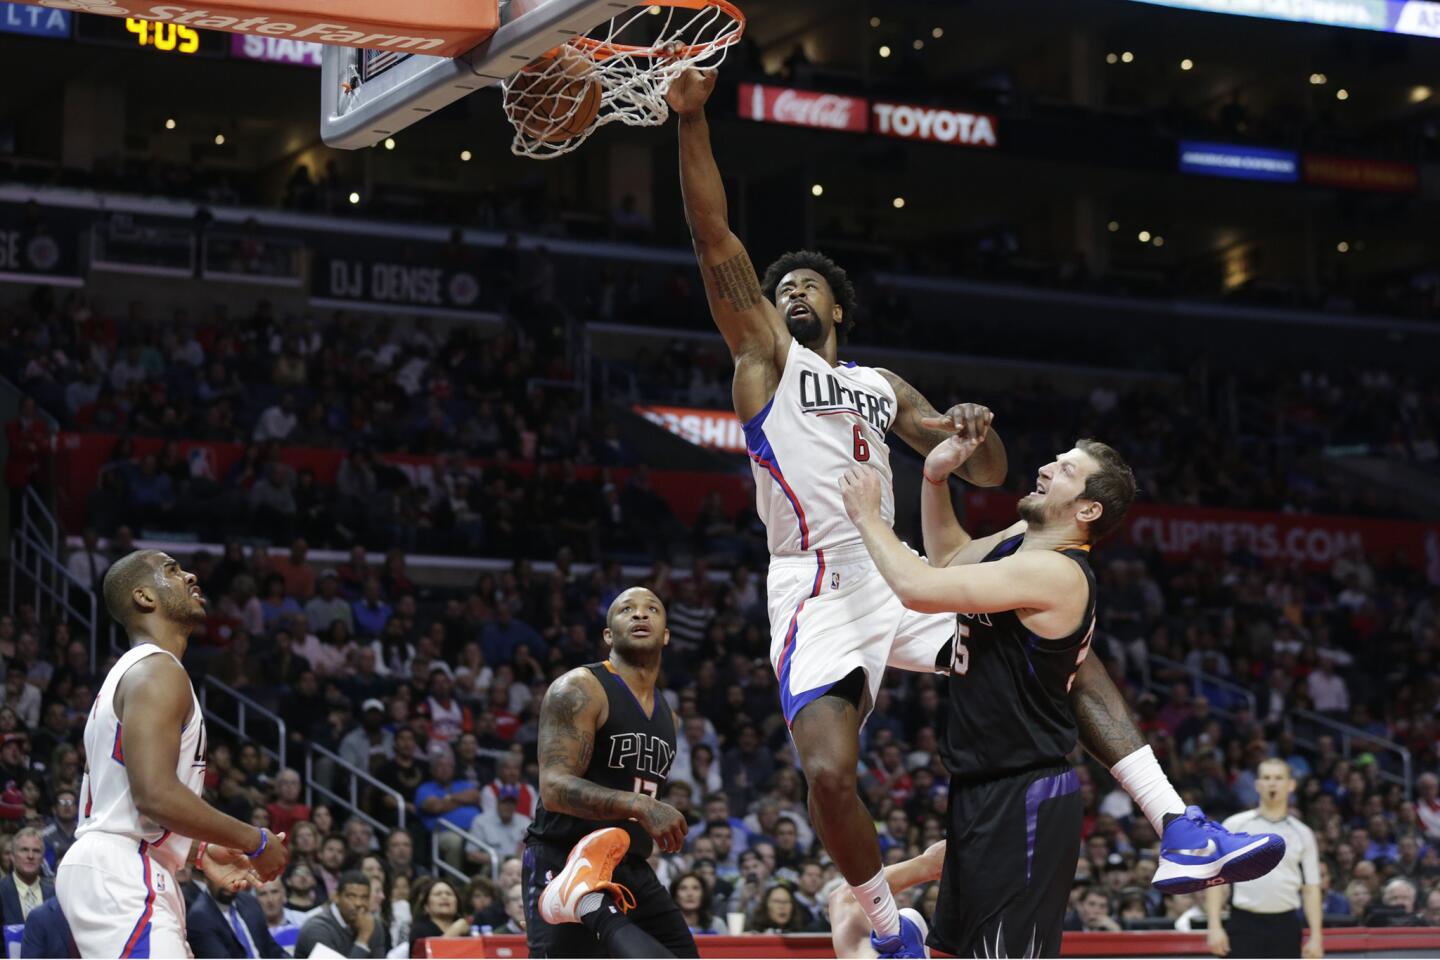 Suns put up little resistance, Clippers win by 40